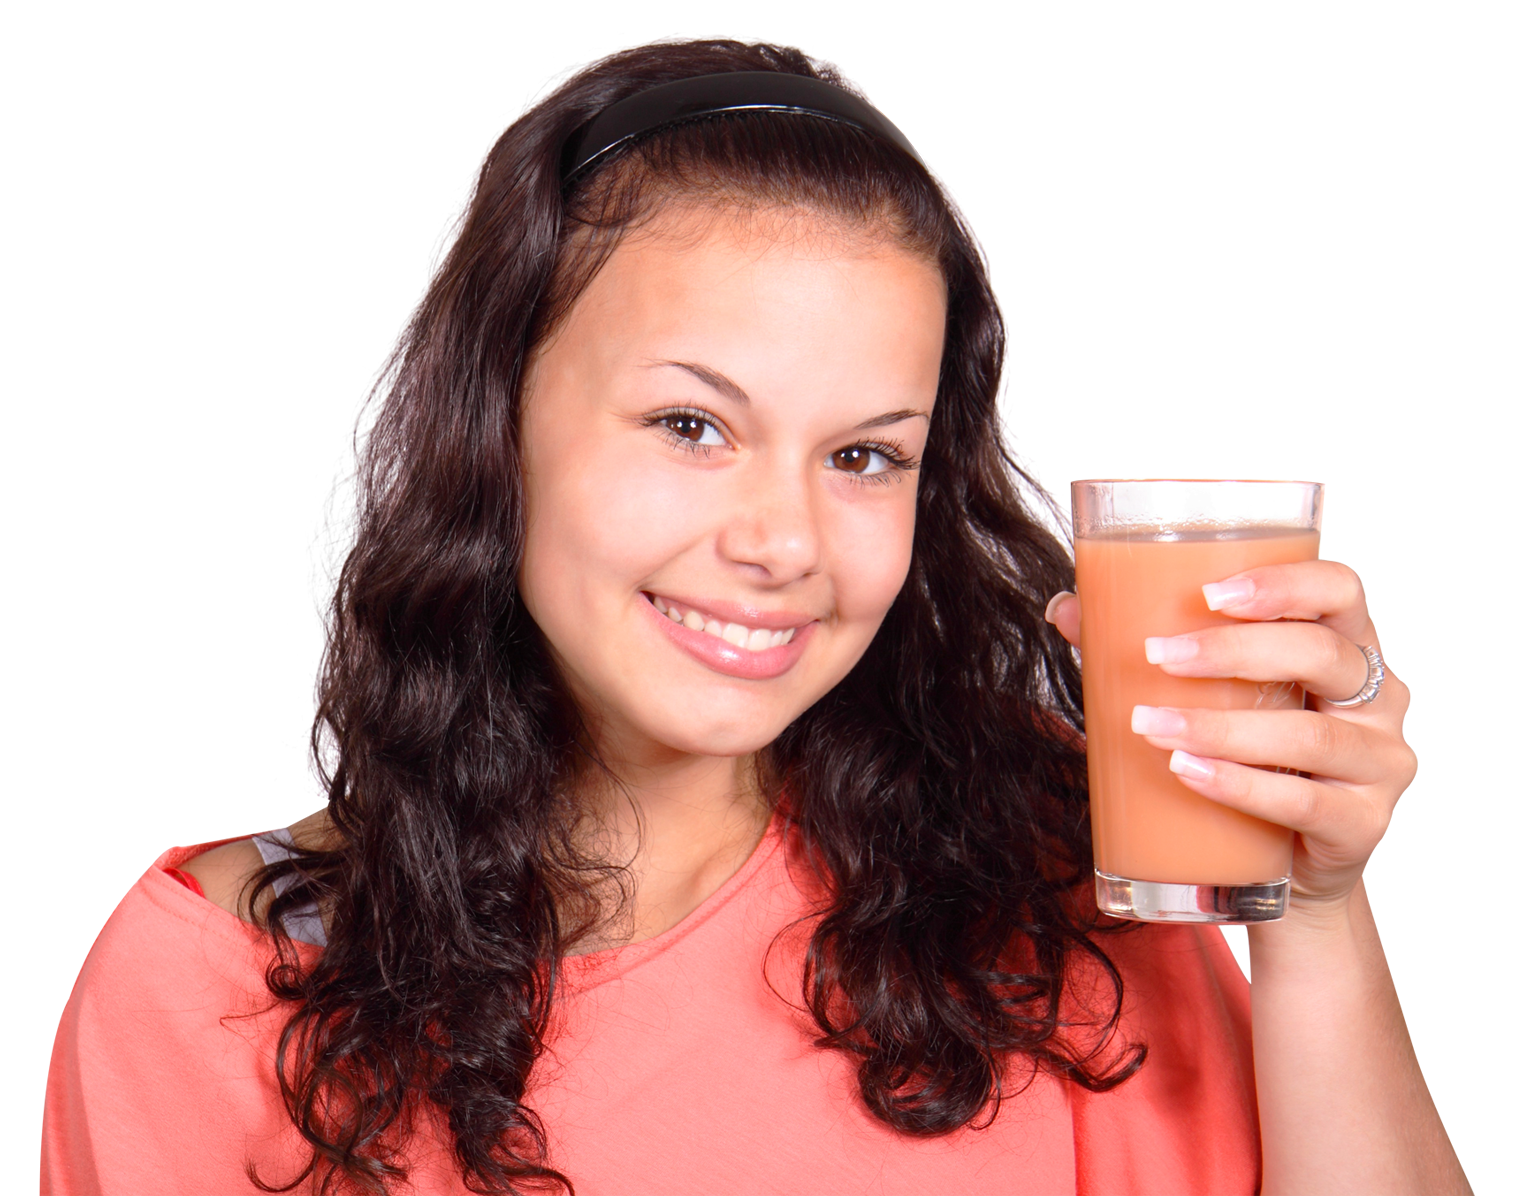 A Woman Holding A Glass Of Juice